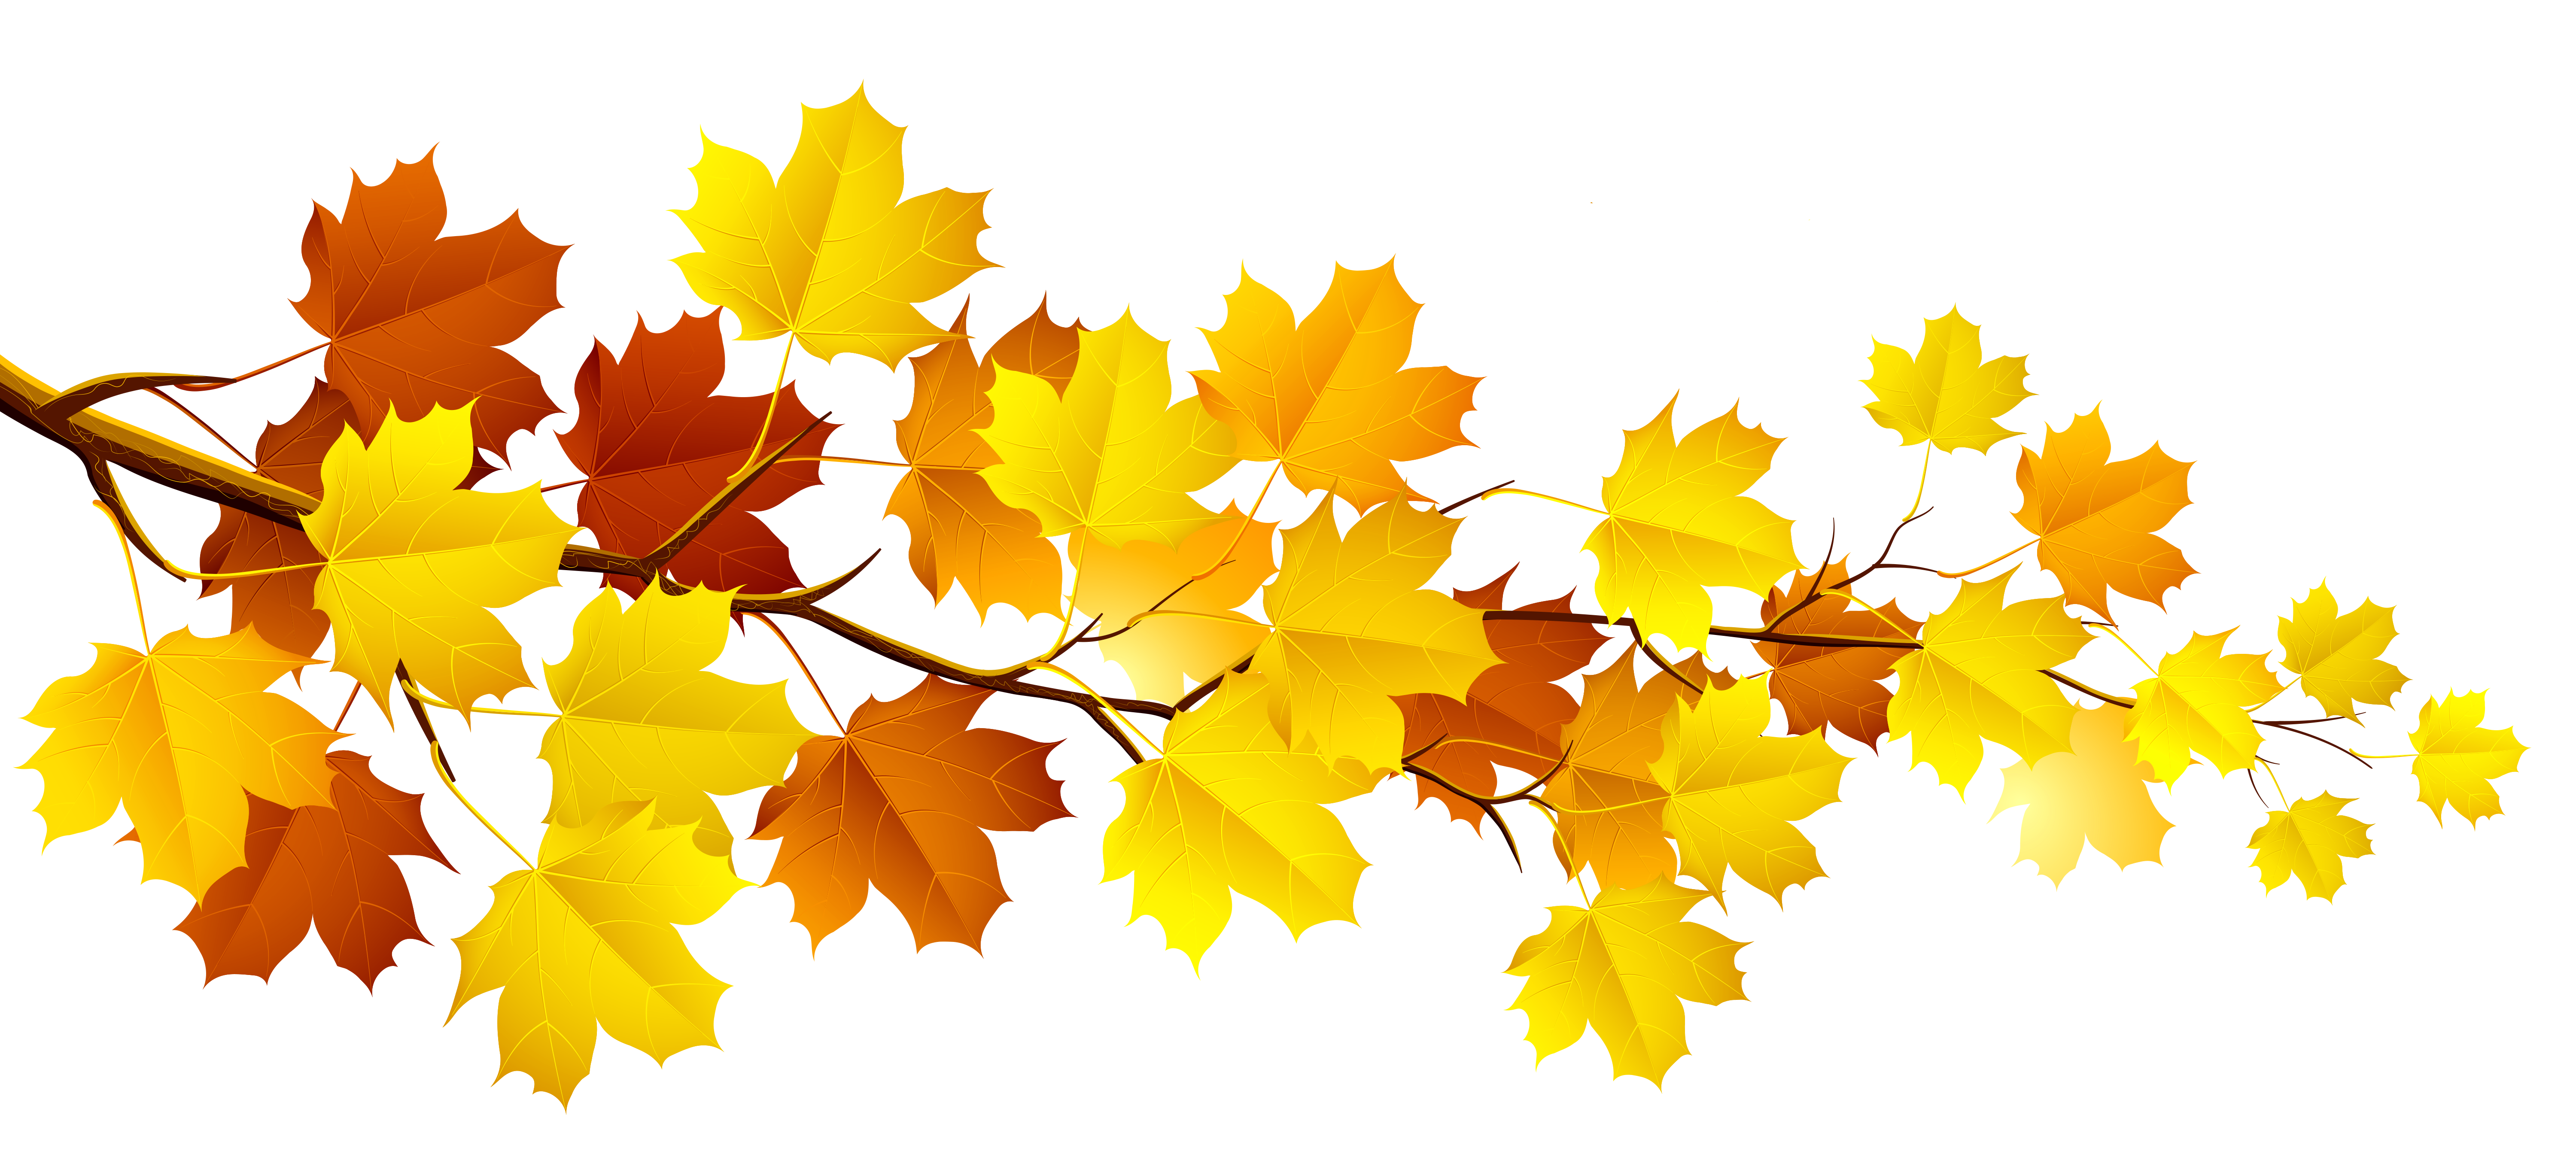 67 Free Fall Leaves Clip Art - Cliparting.com